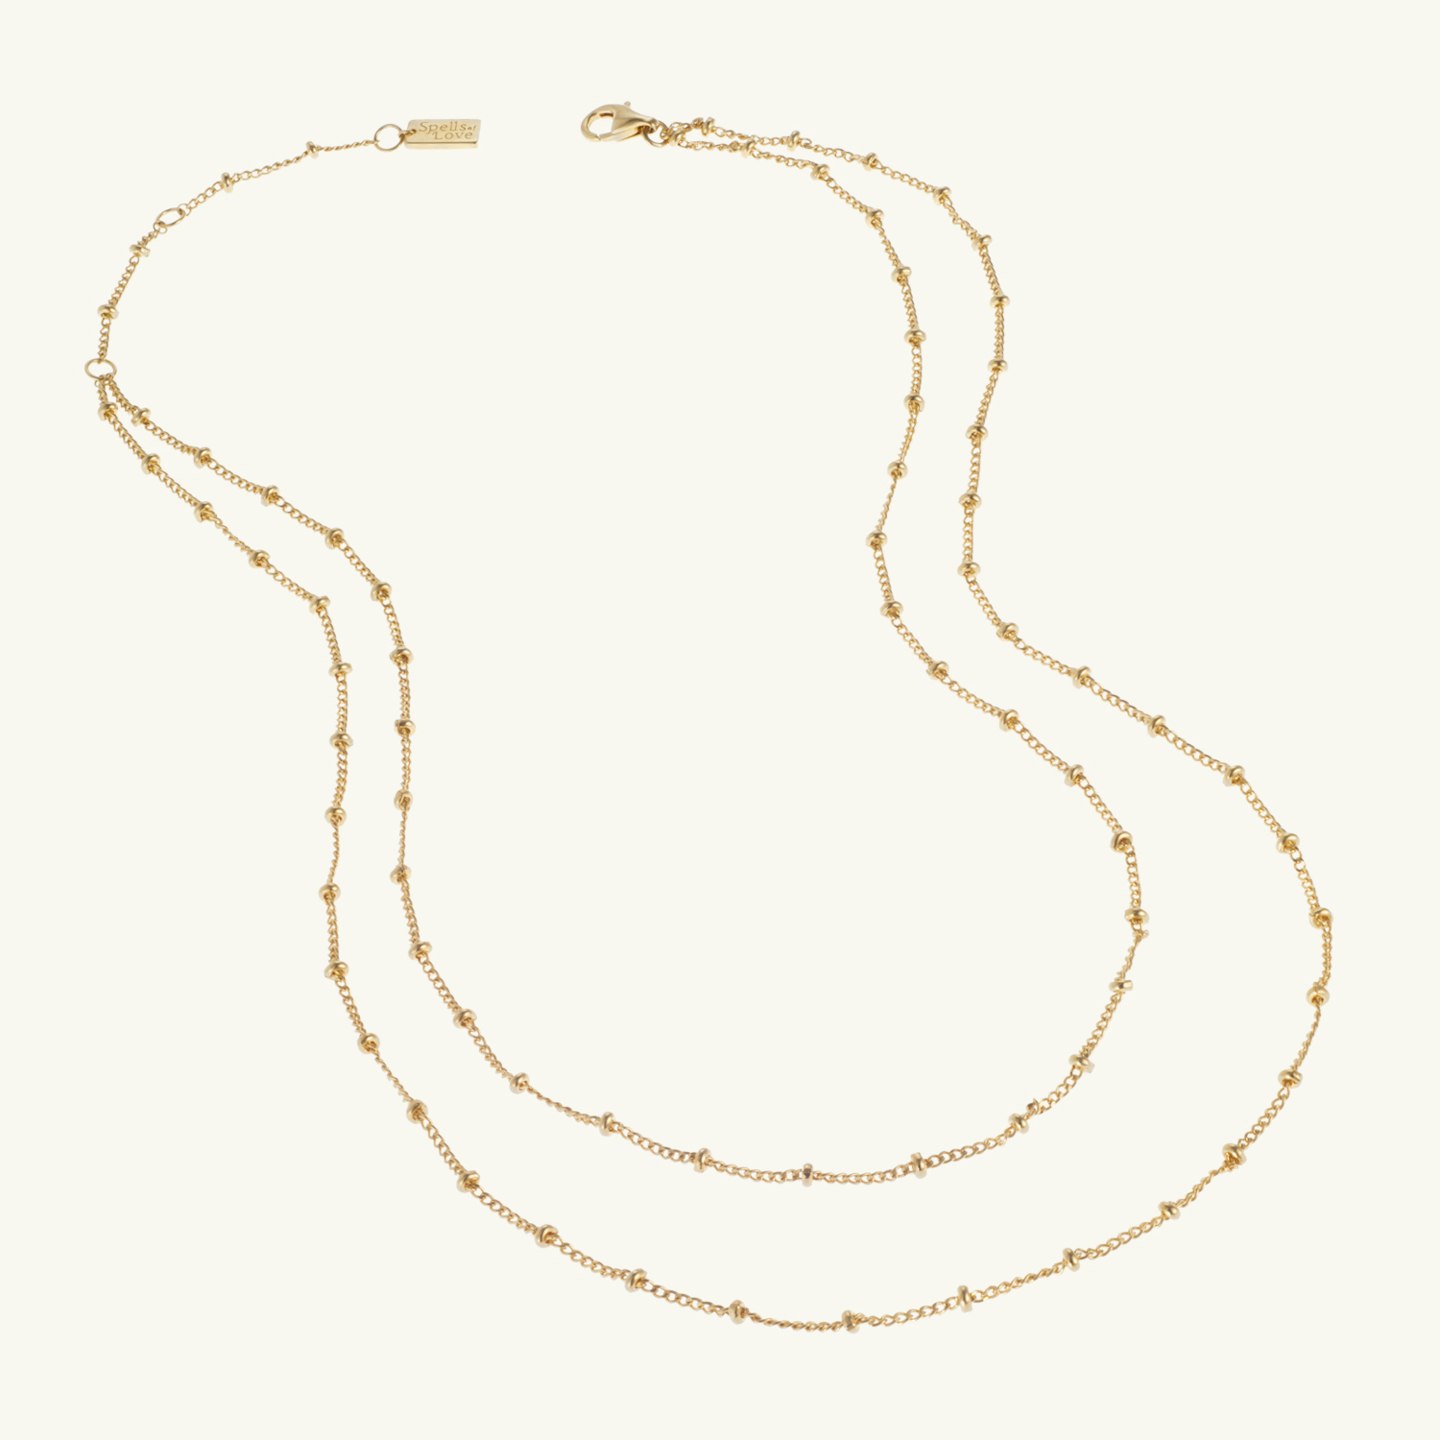 Double Strand Beaded Satellite Necklace Gold, £110